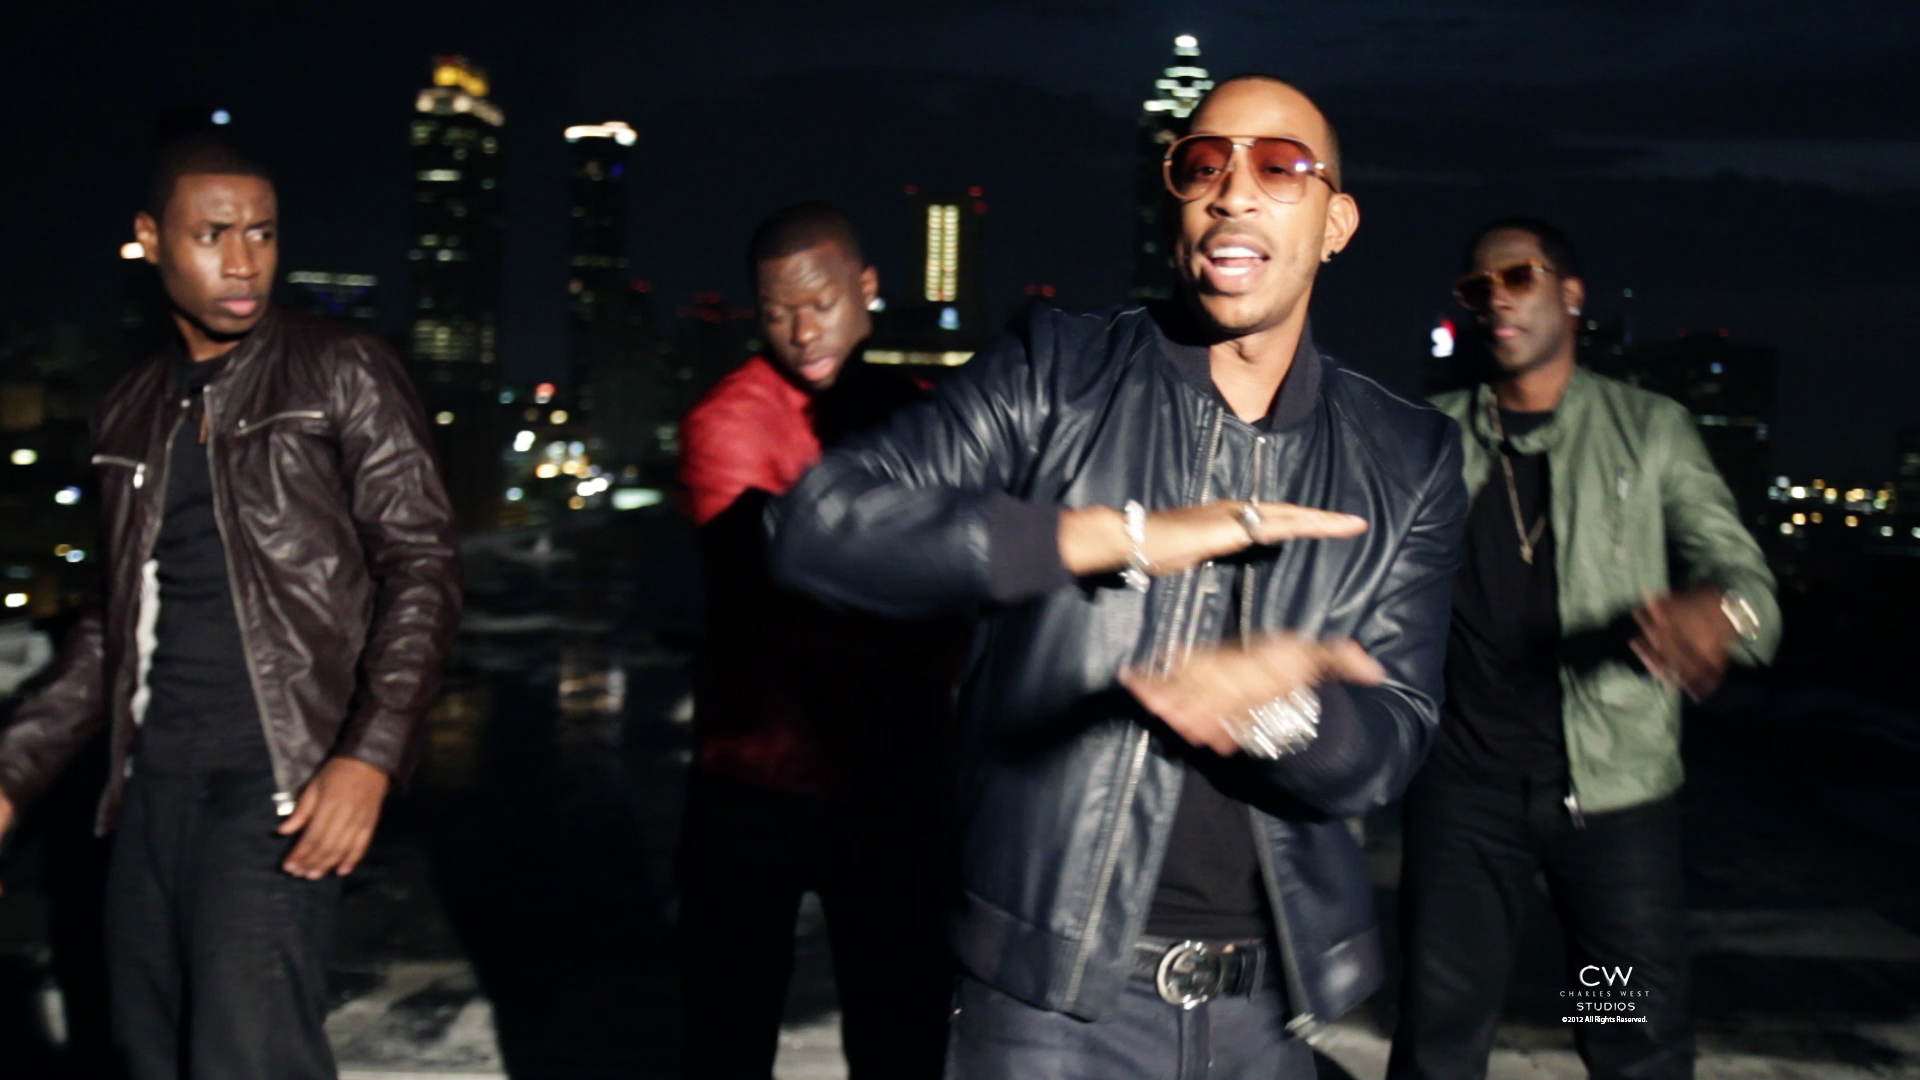 Filming music video with Ludacris and Untitled!